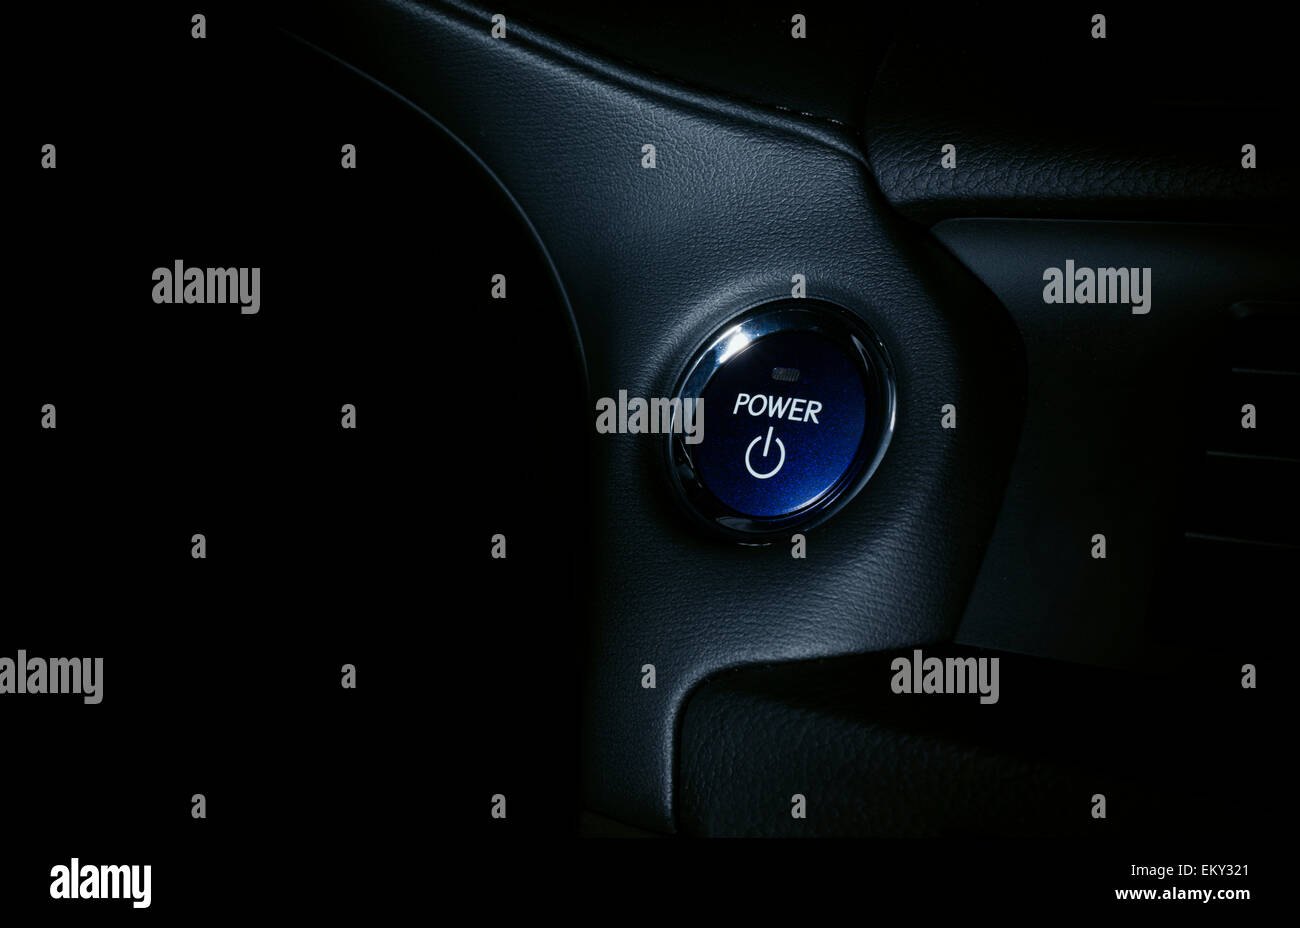 Start button of an electric car Stock Photo